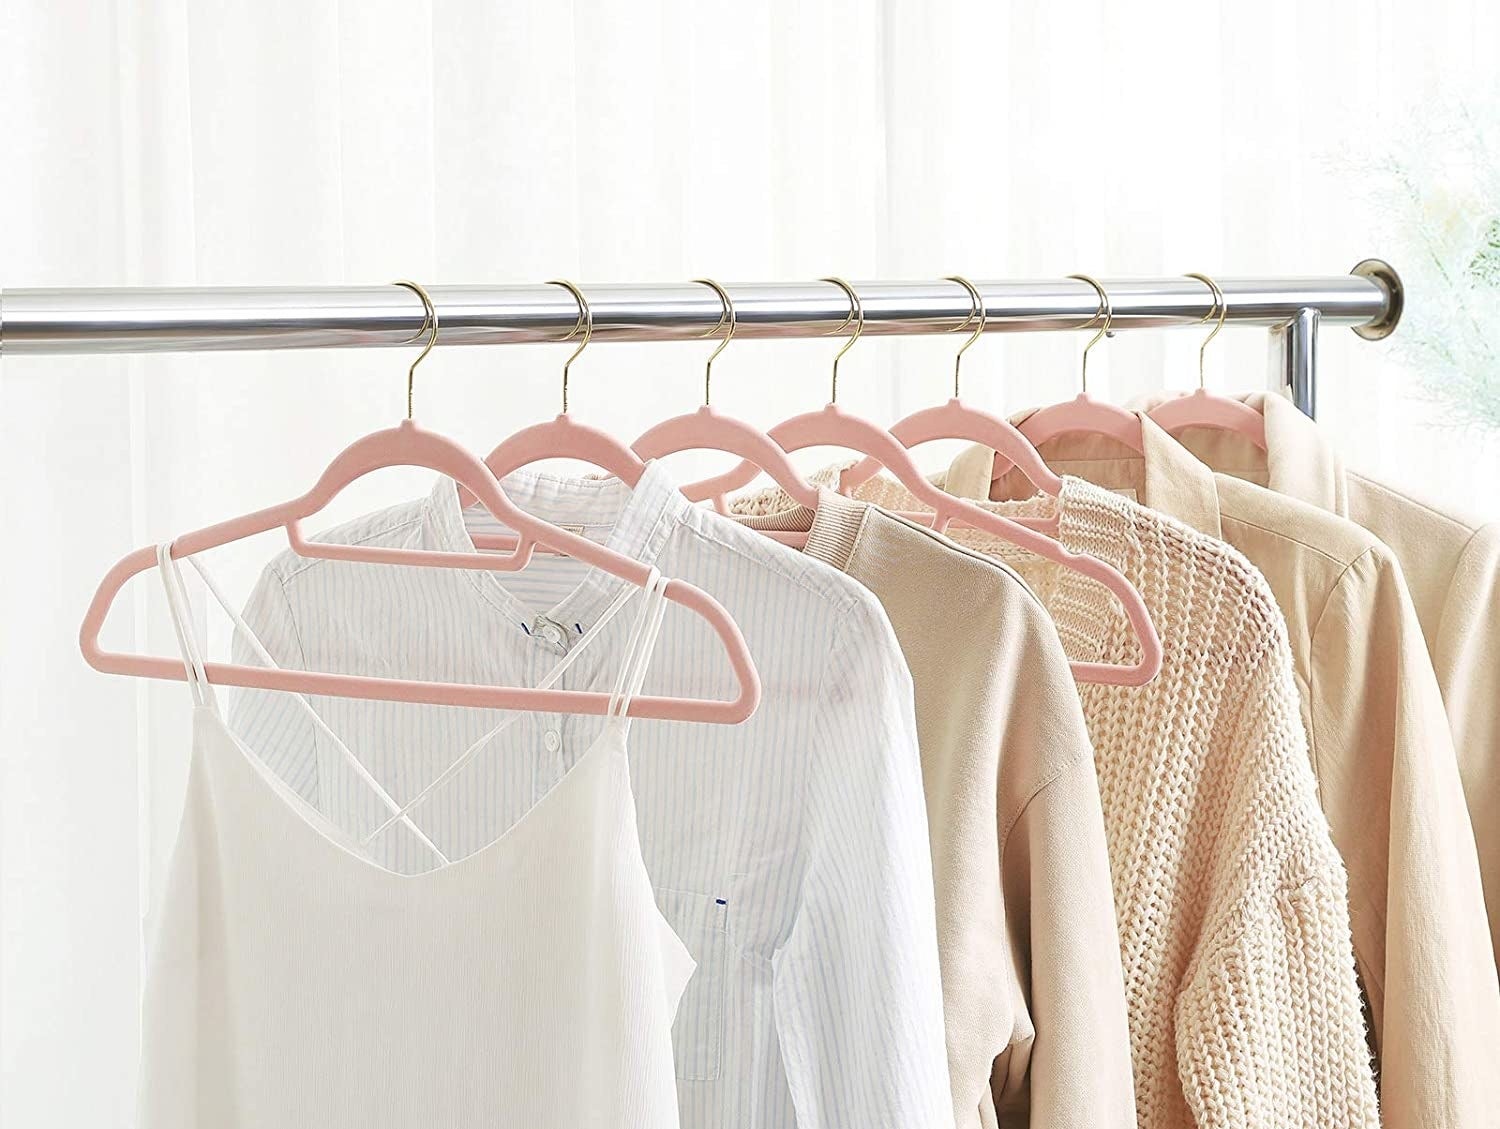 clothes on the hangers